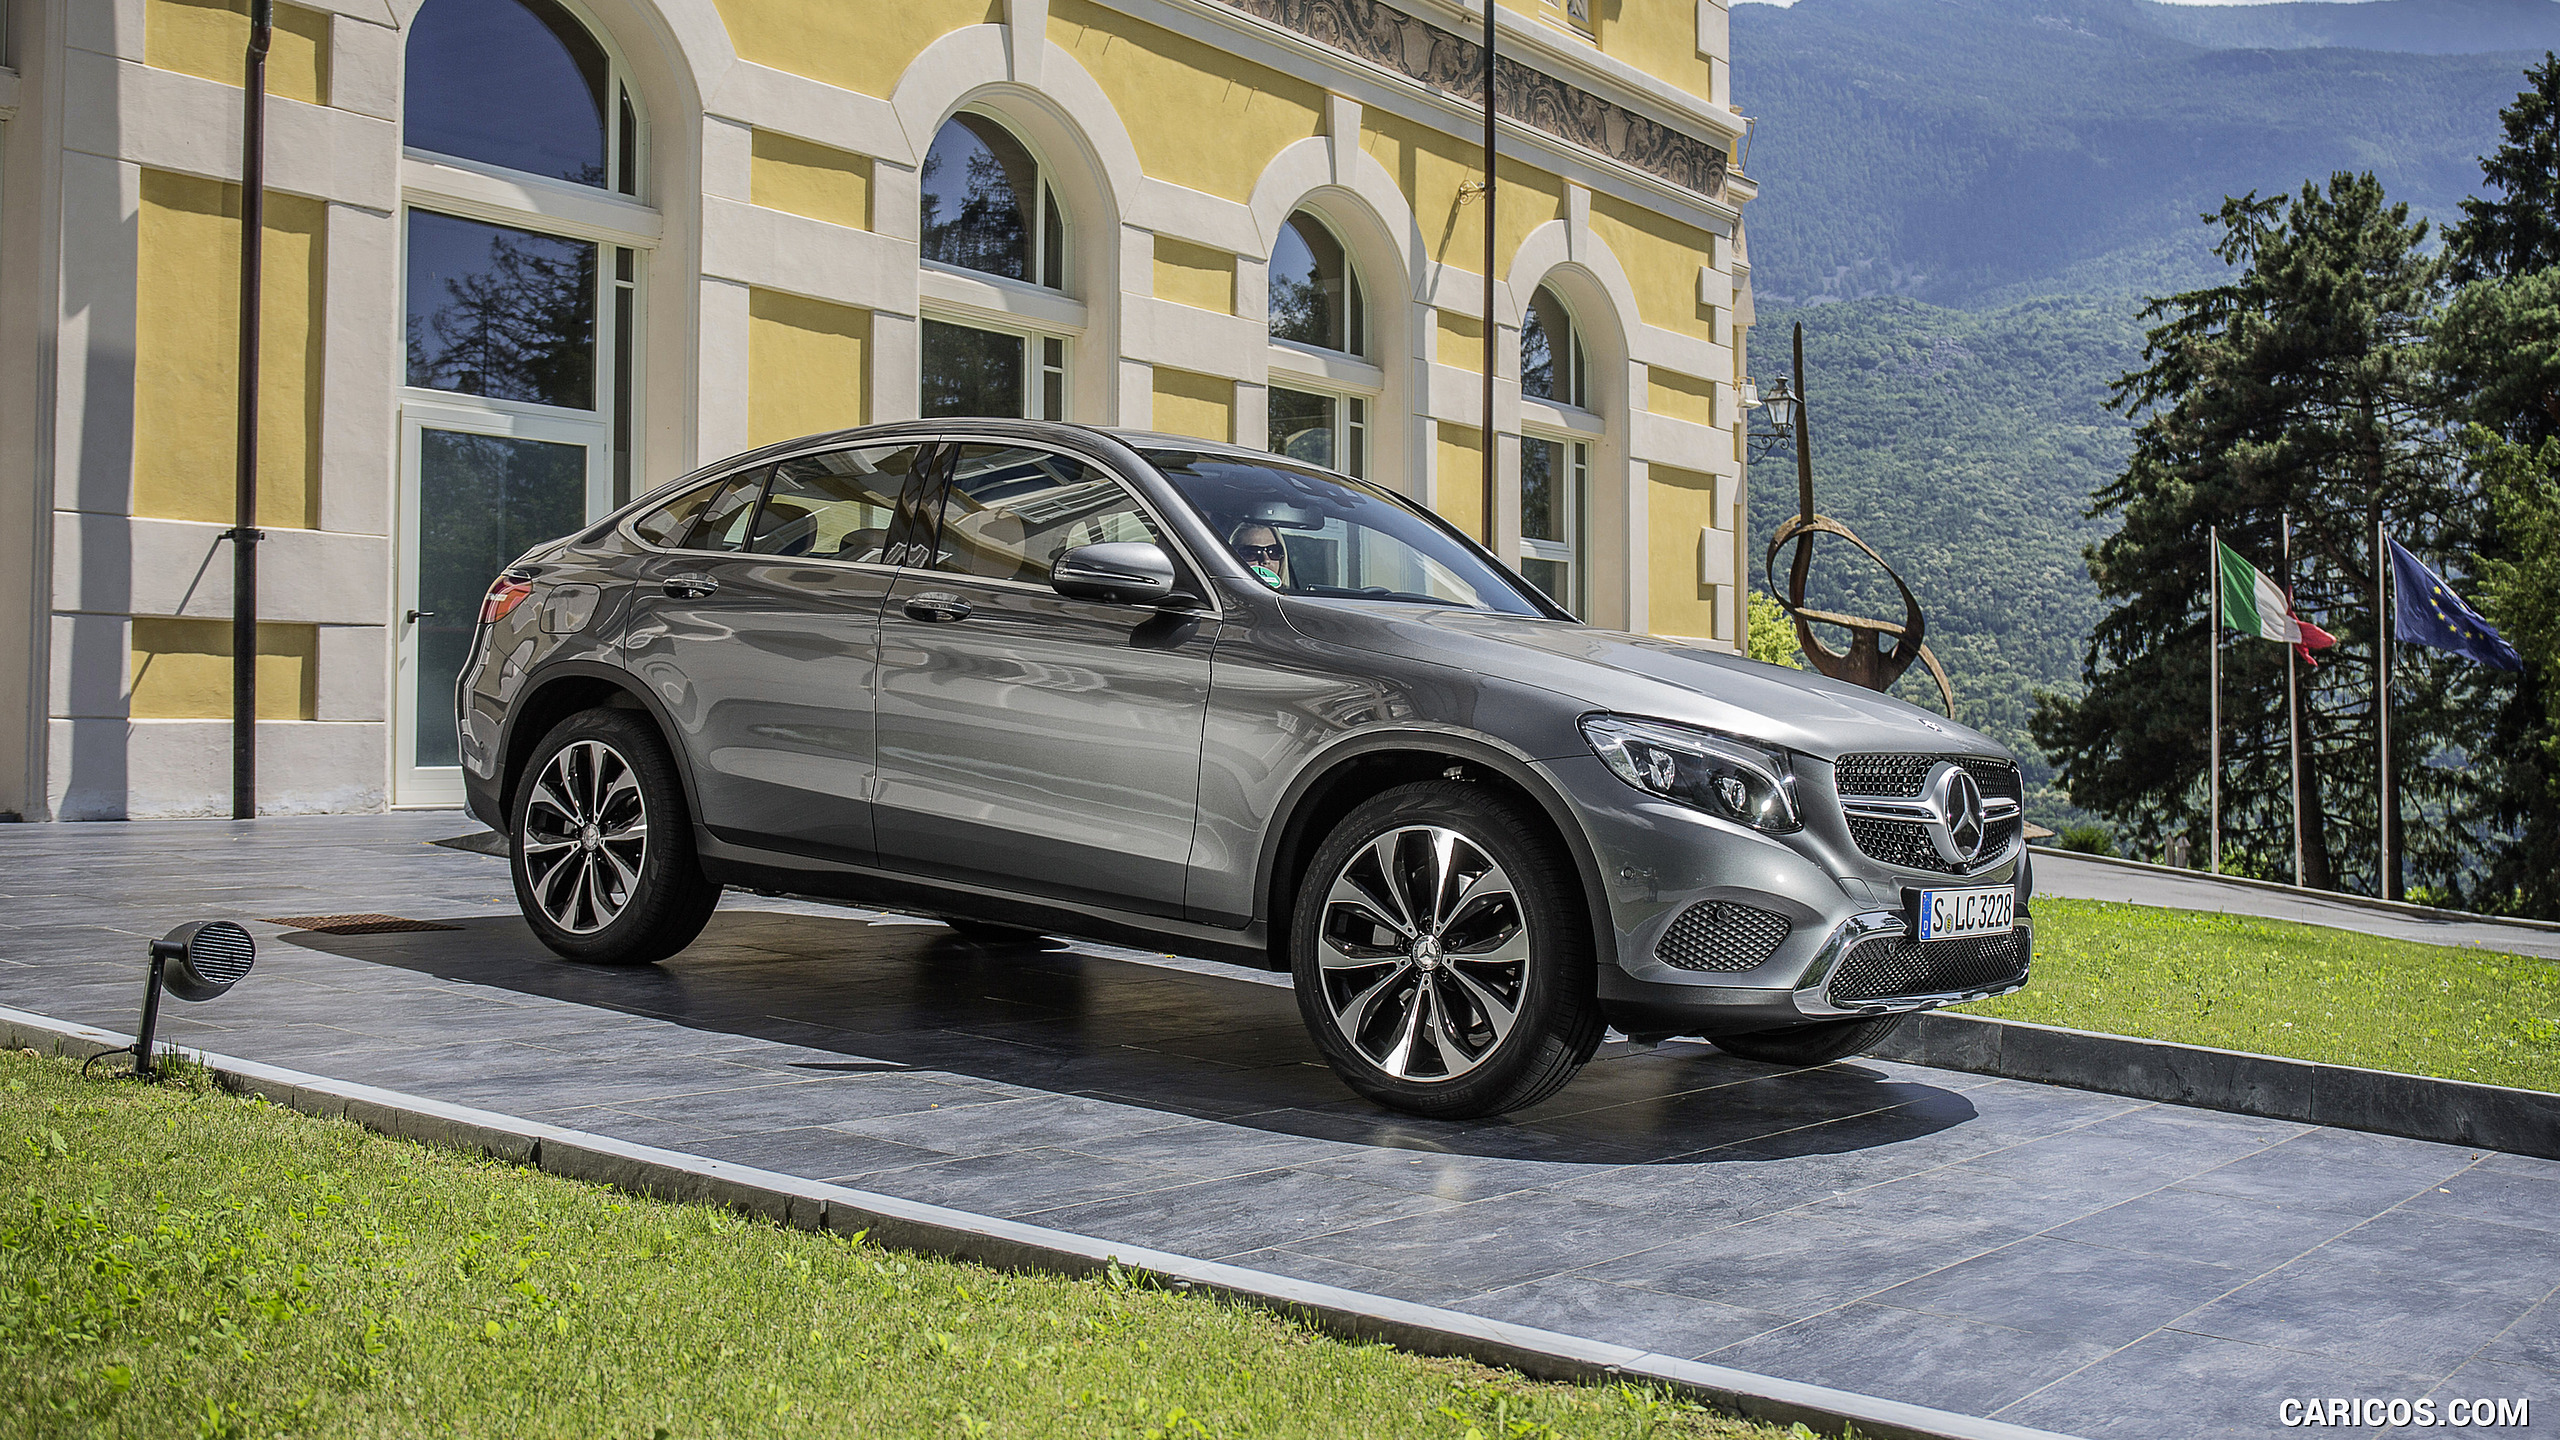 2017 Mercedes-Benz GLC 250 d 4MATIC Coupe (Diesel; Color: Selenite Grey) - Front Three-Quarter, #104 of 144